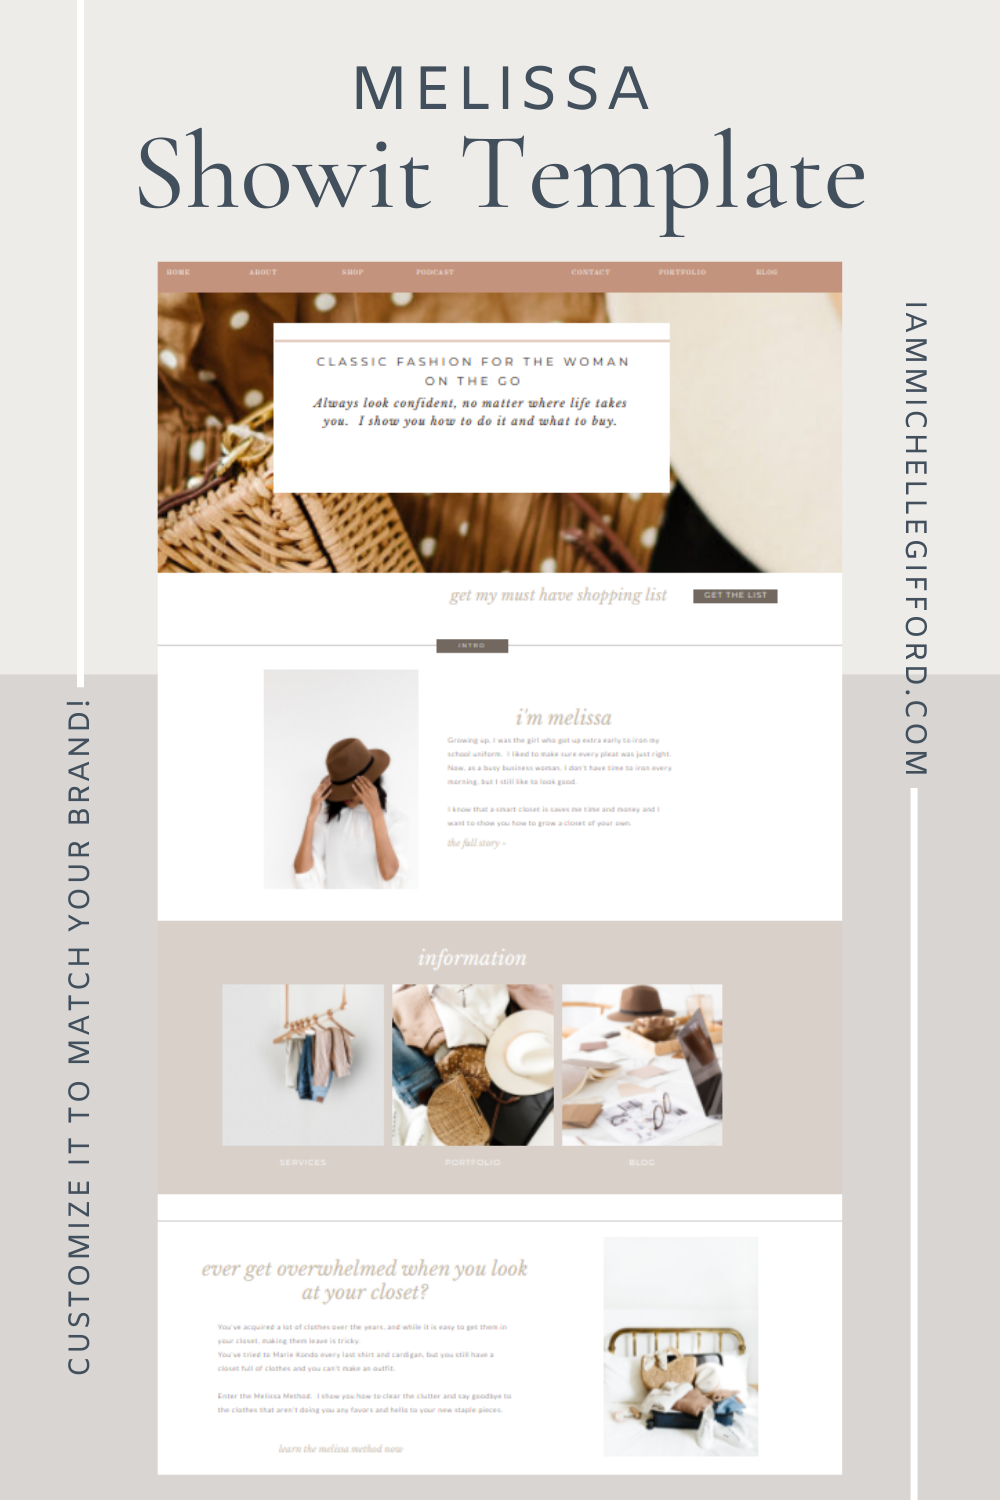 This showit template could be yours now! www.iammichellegifford.com